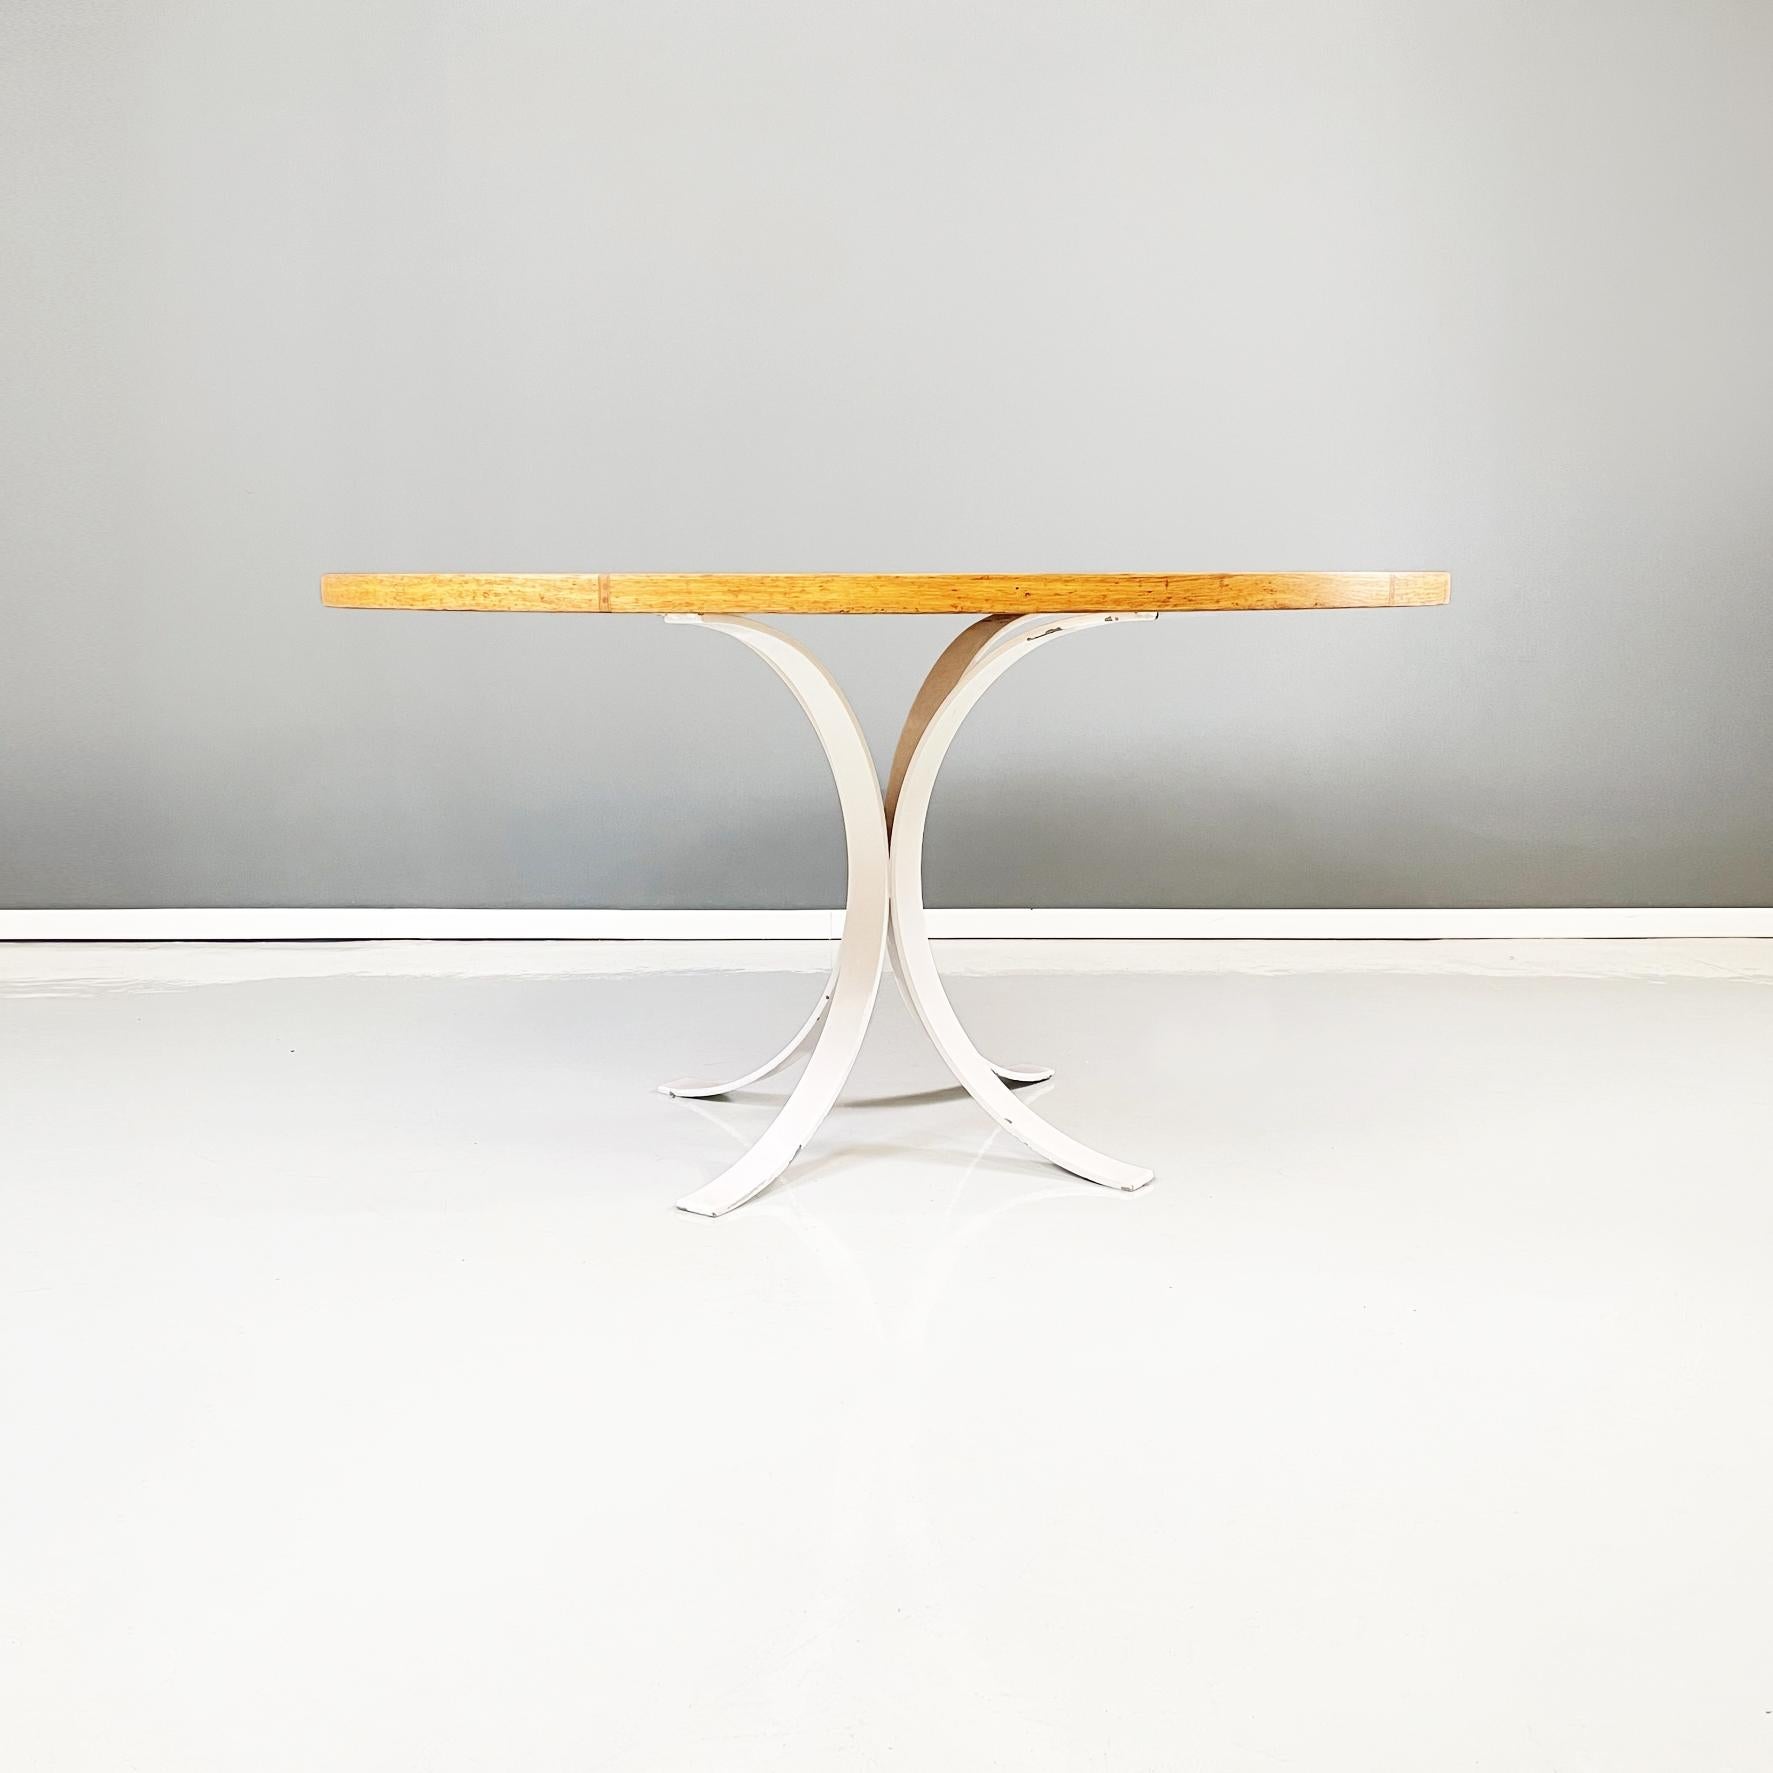 Italian modern Round dining table in white metal and solid wood, 1970s
Dining table with round thick top of large diameter in solid wood. The white painted metal structure, on which the top rests, narrows in the center and widens at the bottom,